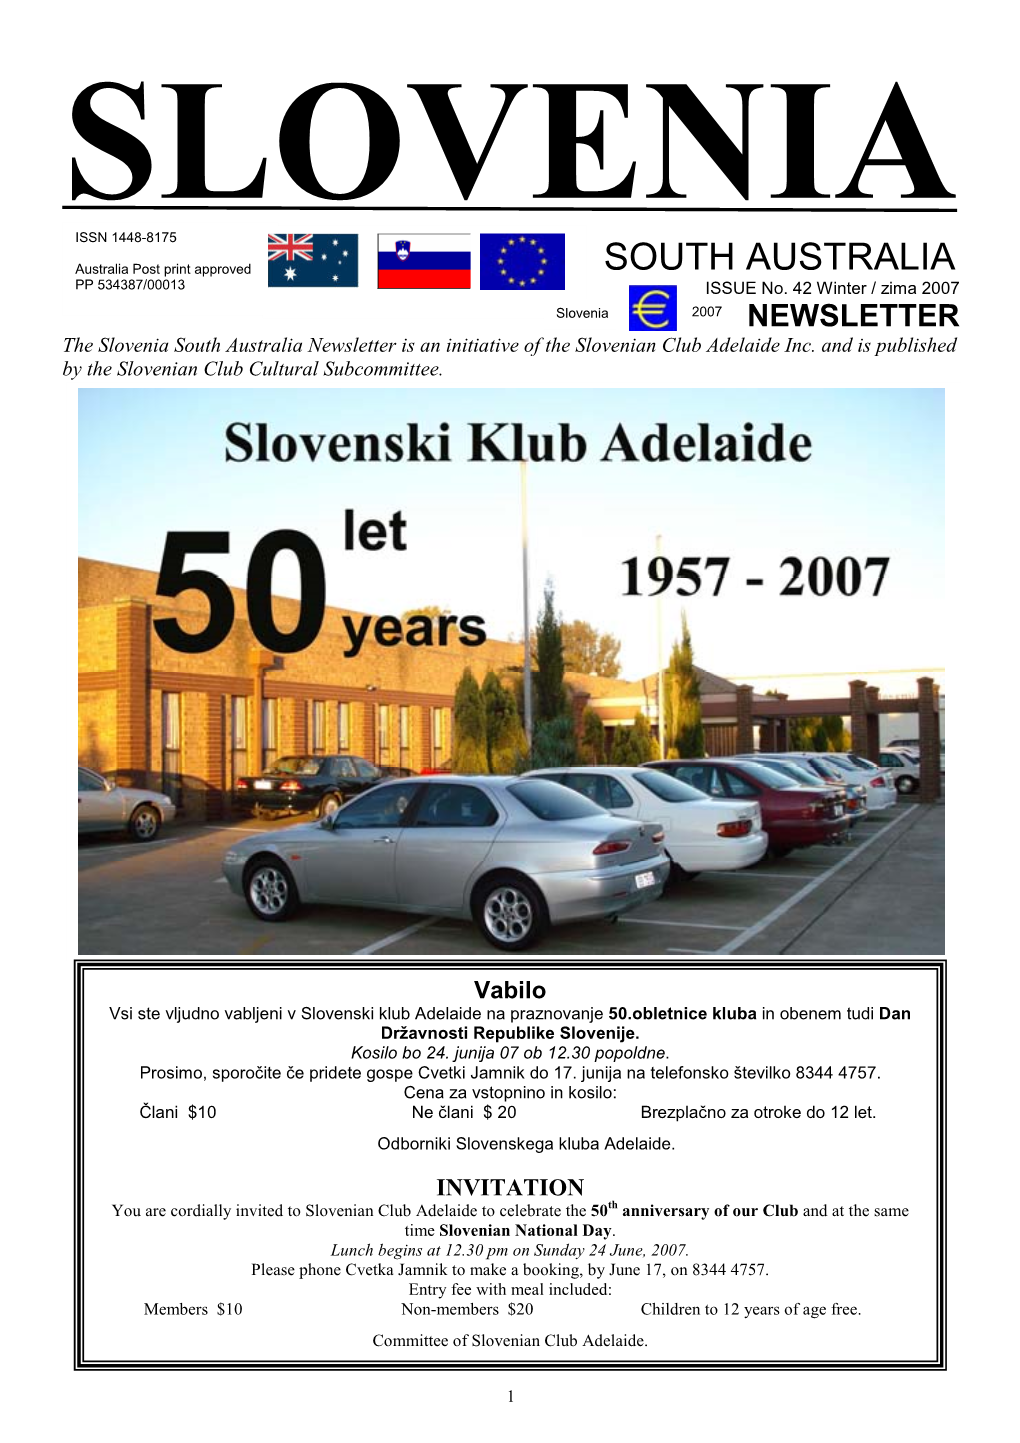 South Australia Newsletter Is an Initiative of the Slovenian Club Adelaide Inc